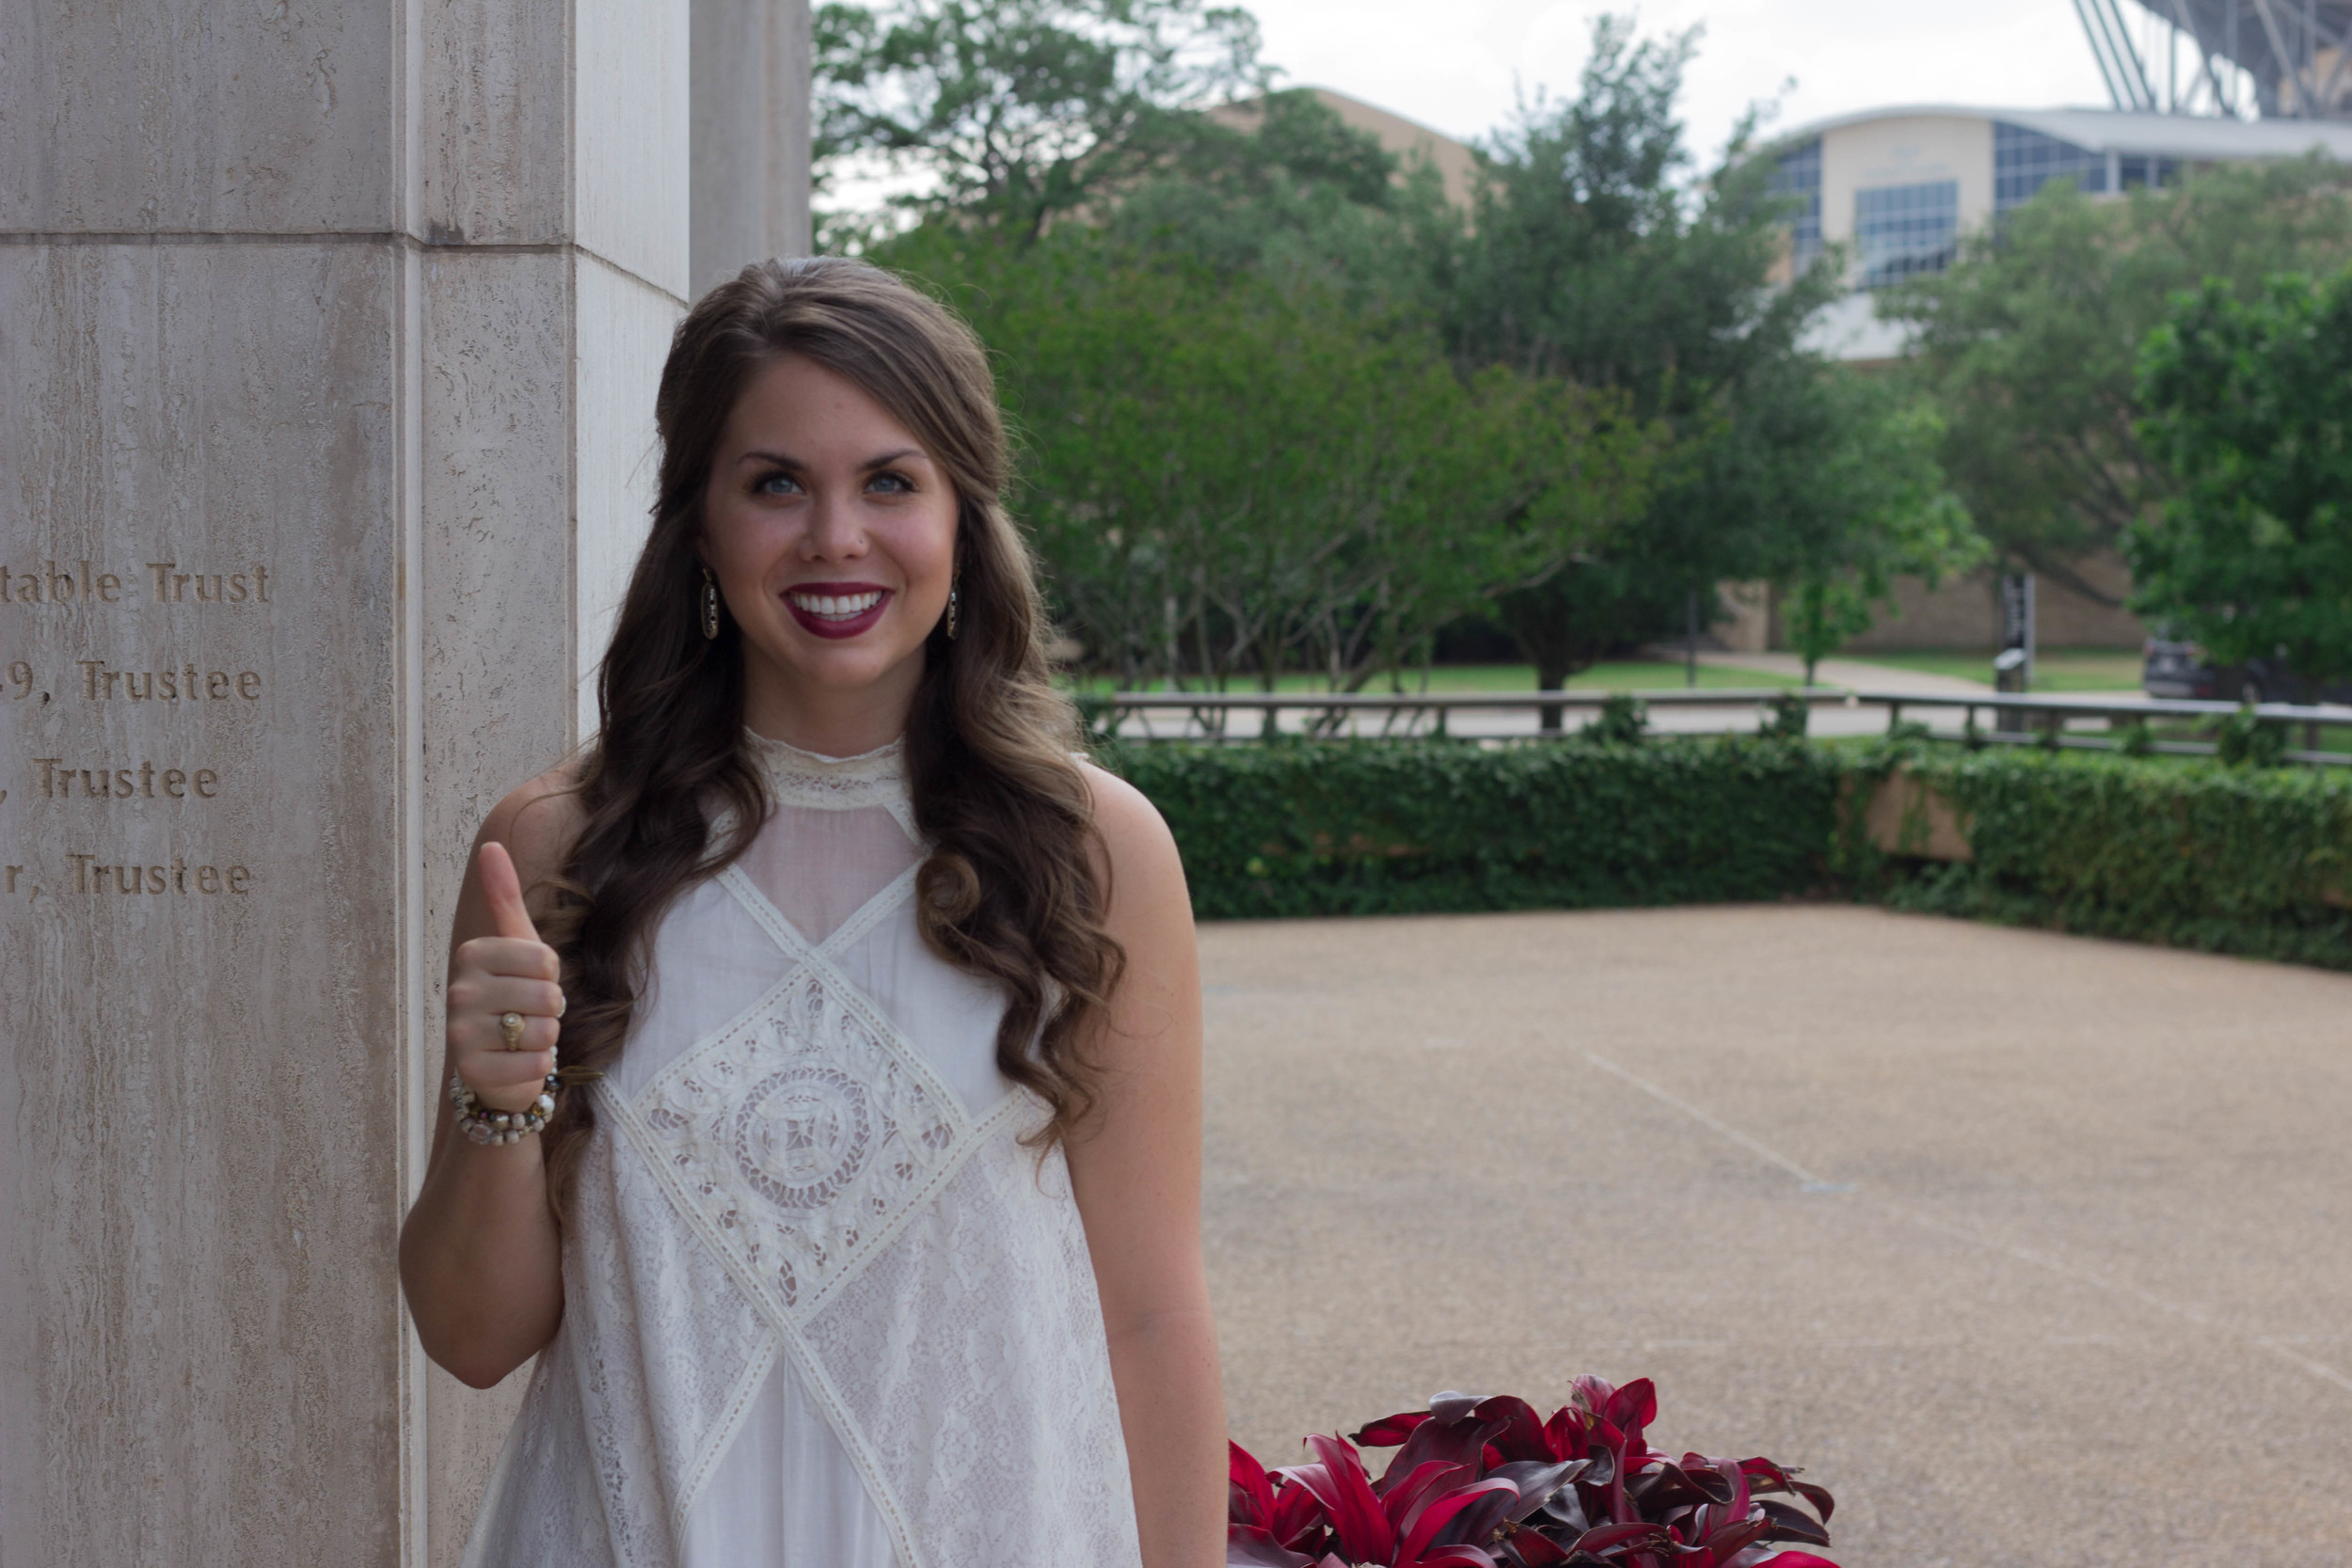 free people lace swing dress, college station, things to do in college station bryan, kendra scott earrings, hullabaloo, aggies